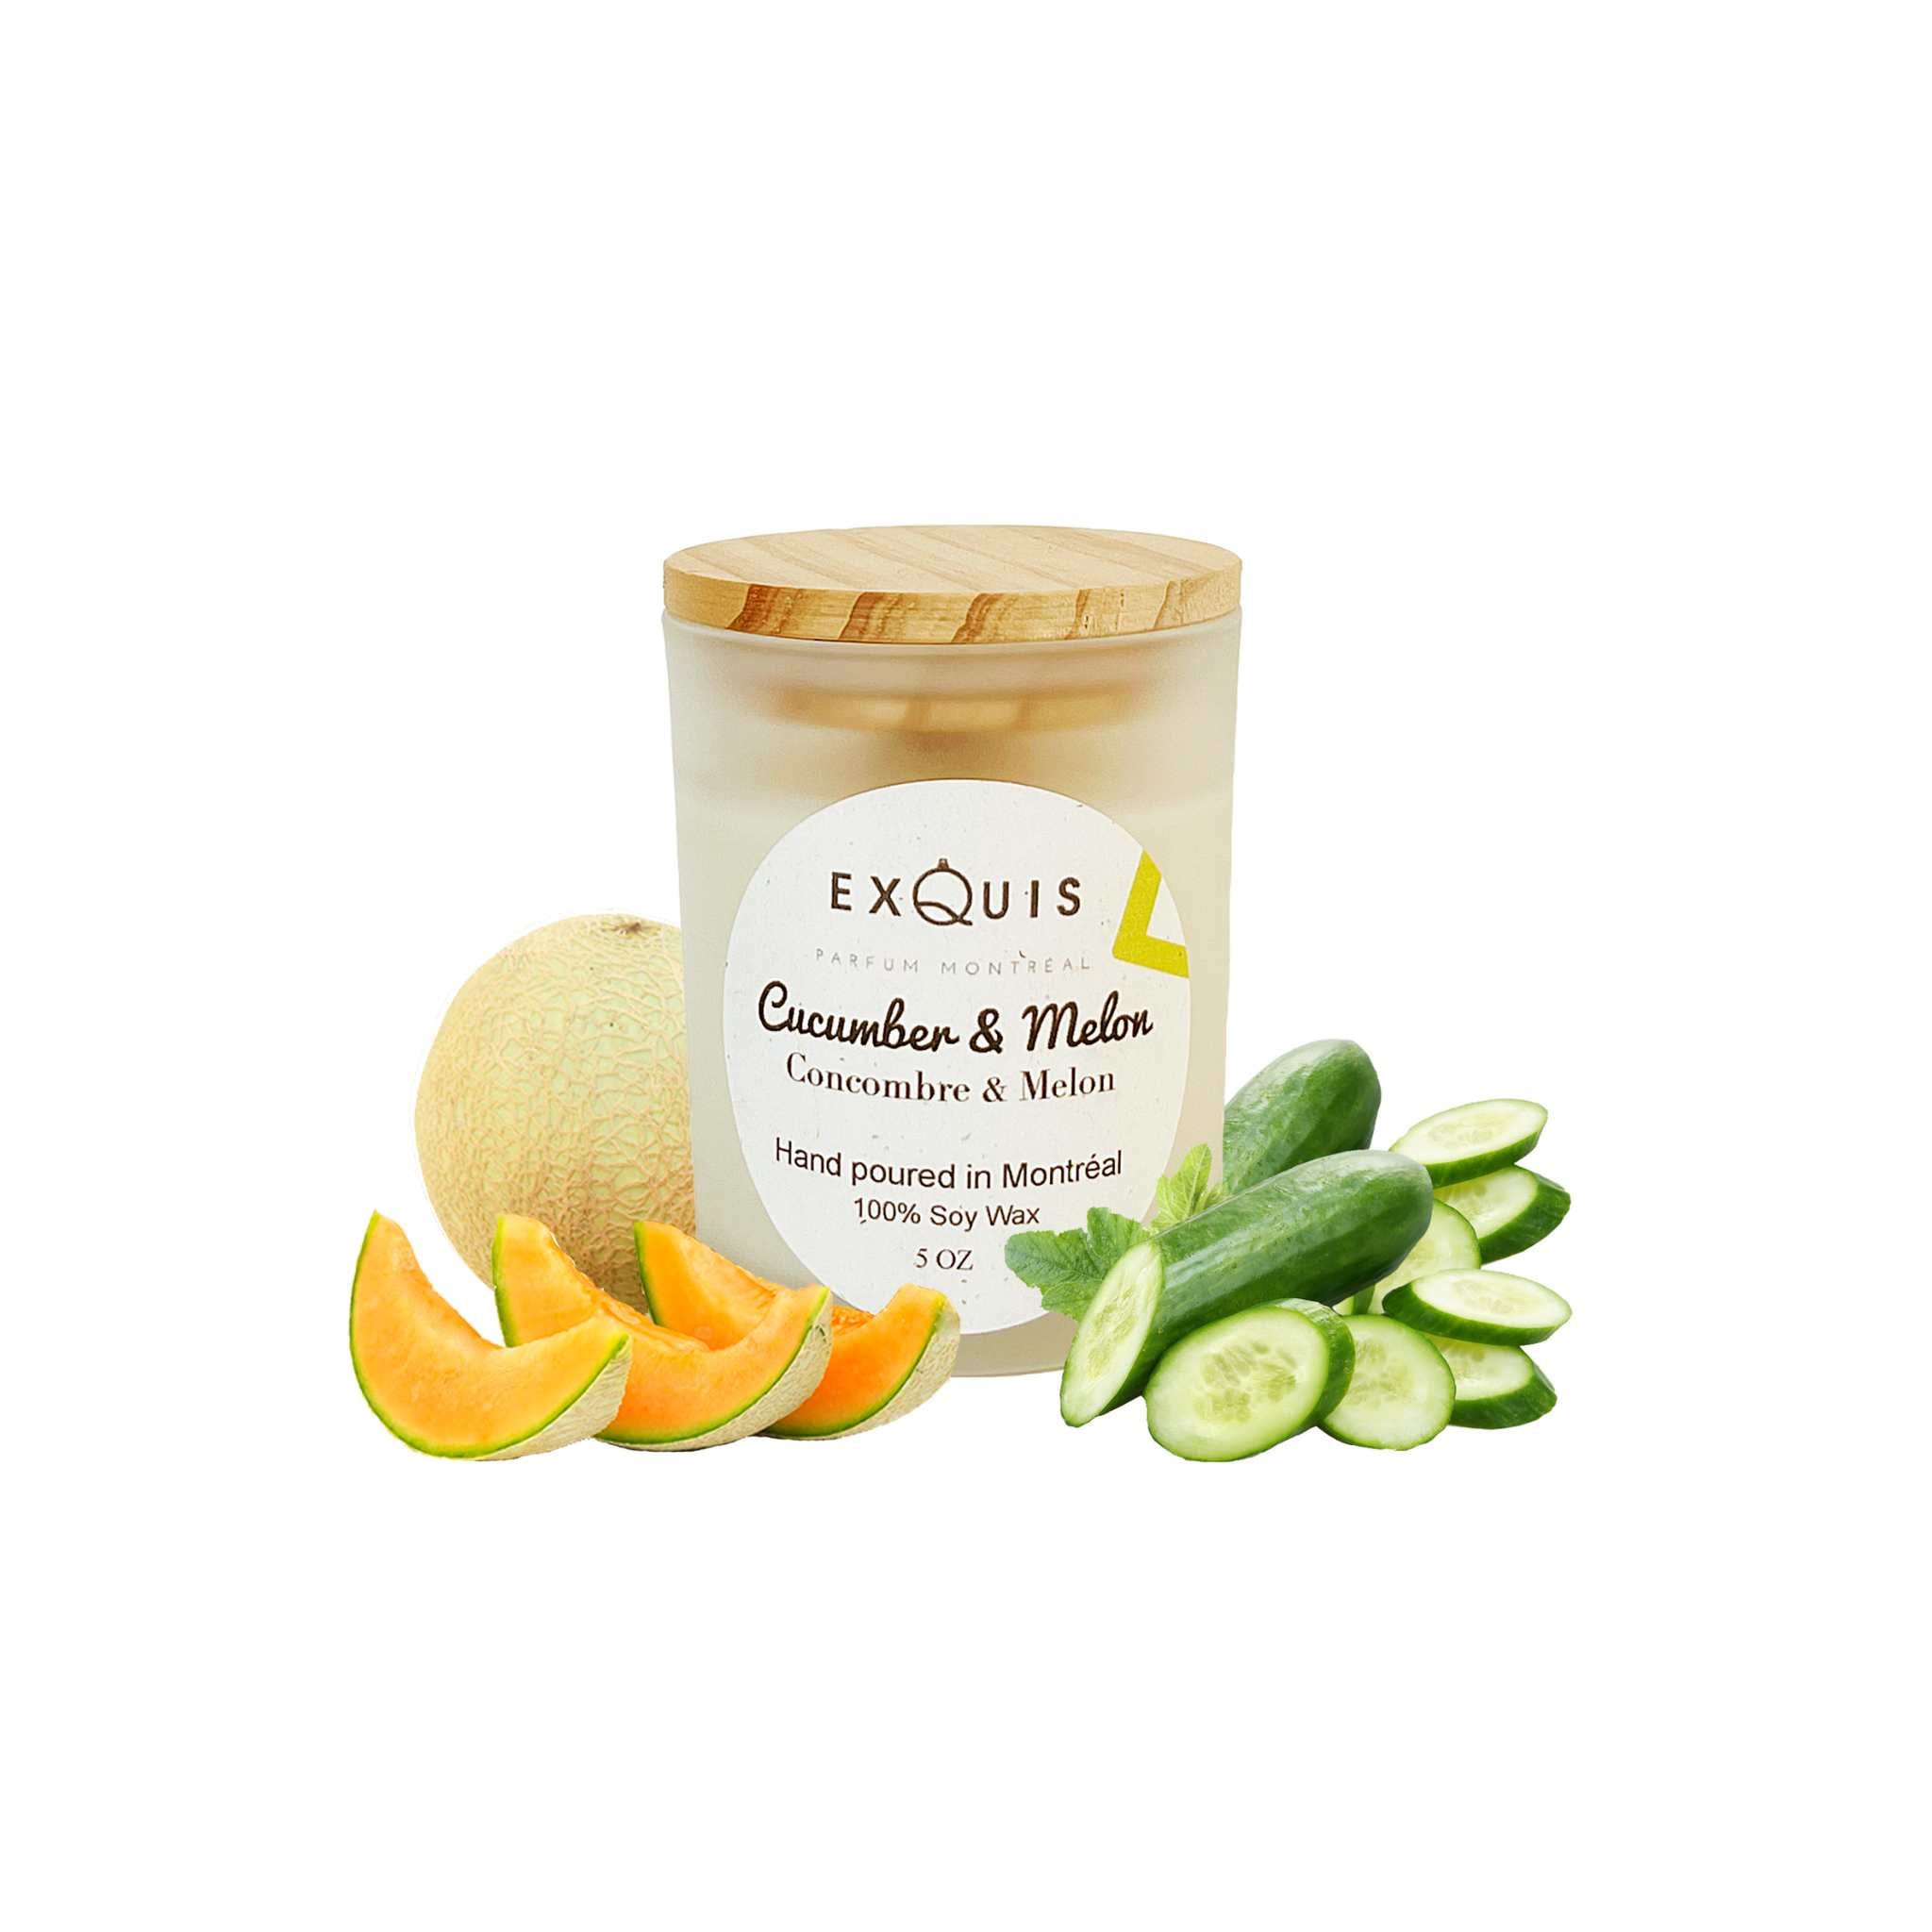 Cucumber & Melon Candle wooden wick